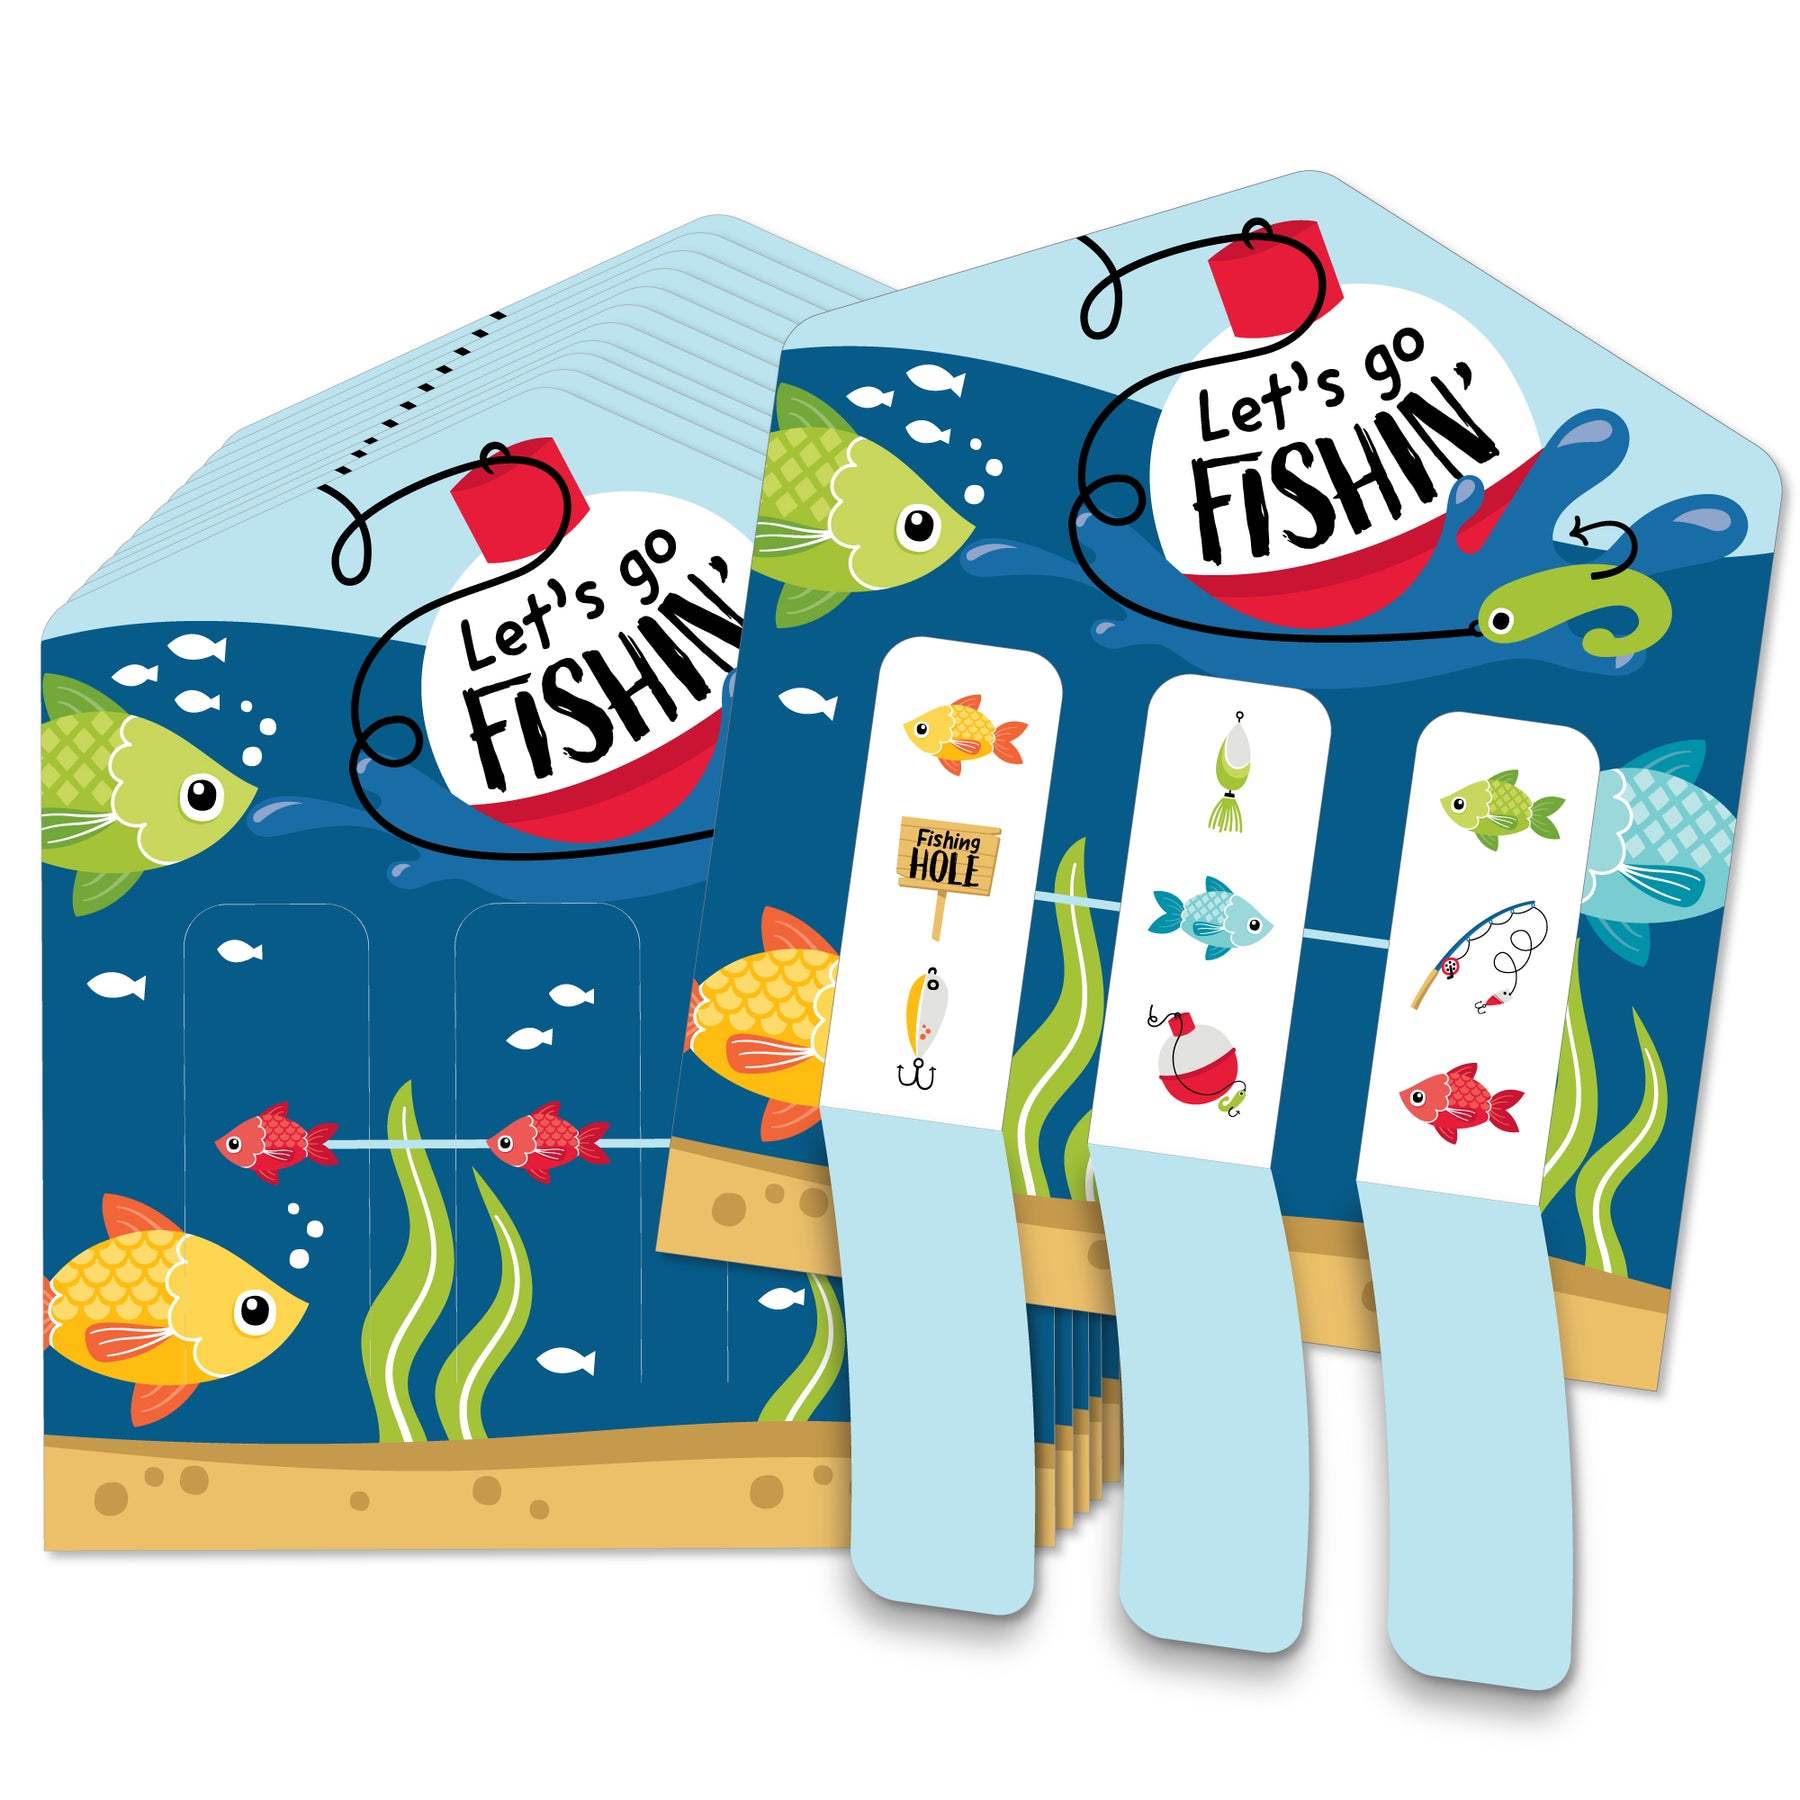 Let's Go Fishing - Fish Themed Birthday Party or Baby Shower Game